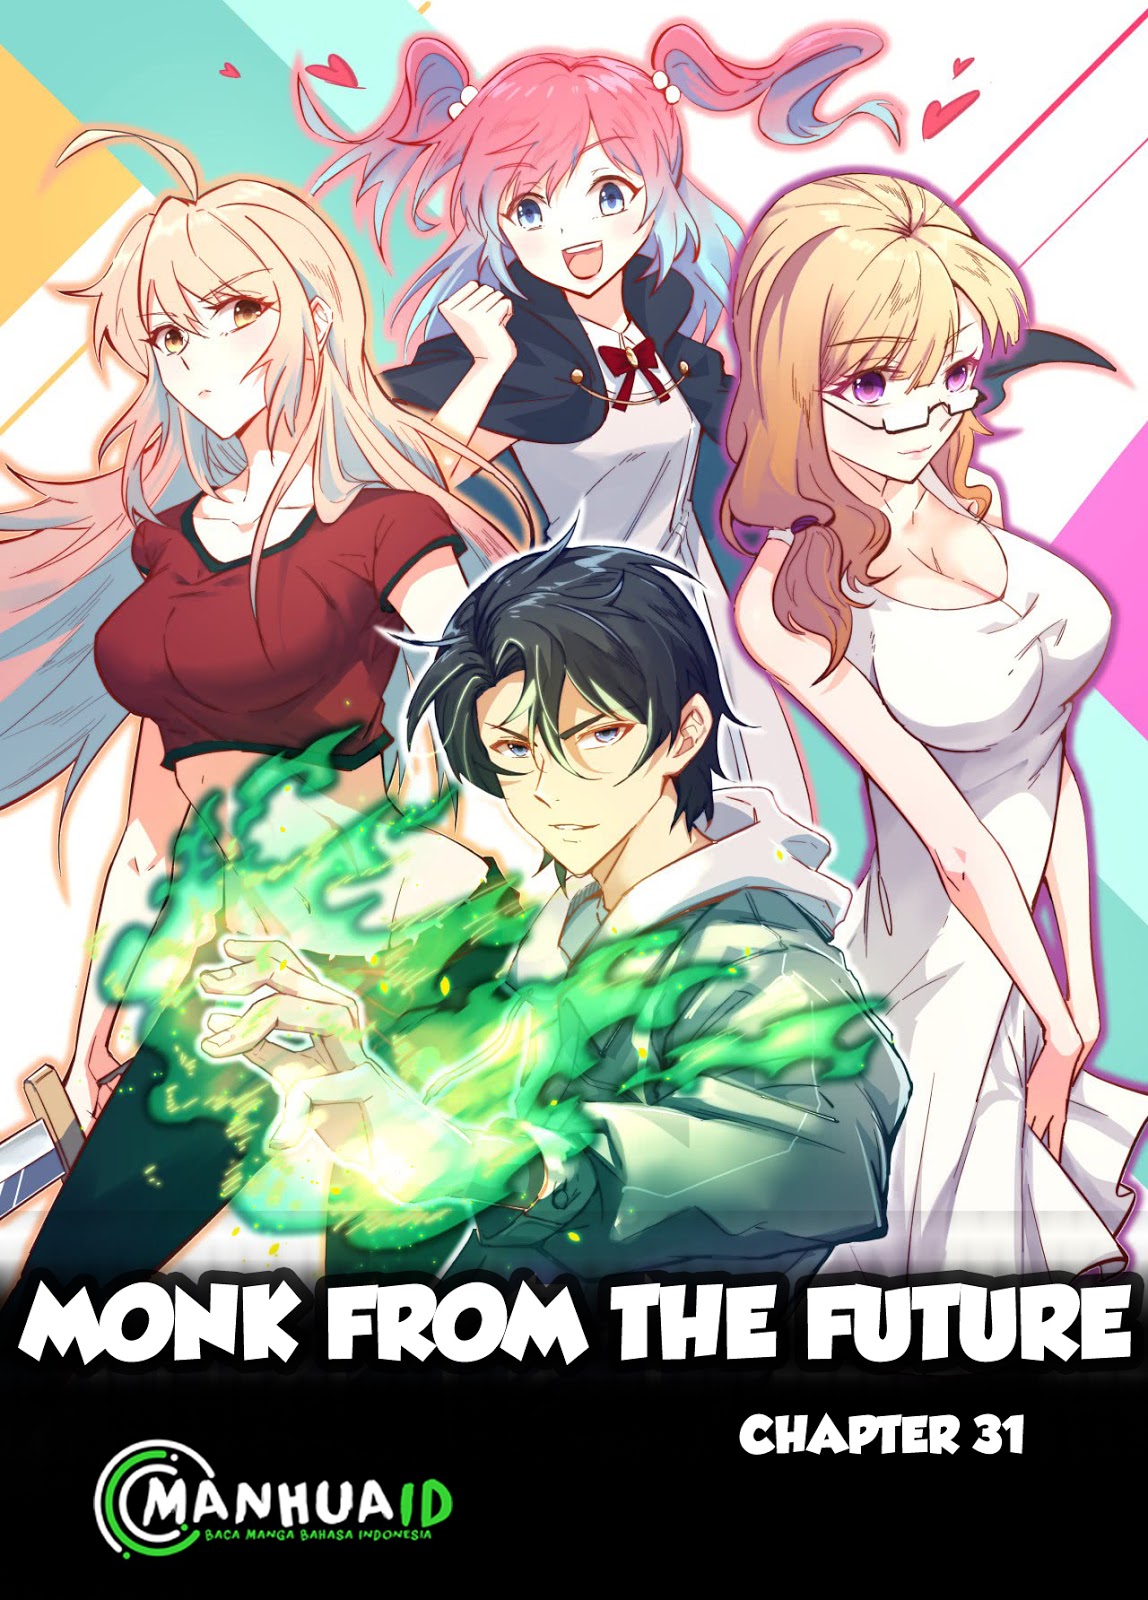 Monk From the Future Chapter 31